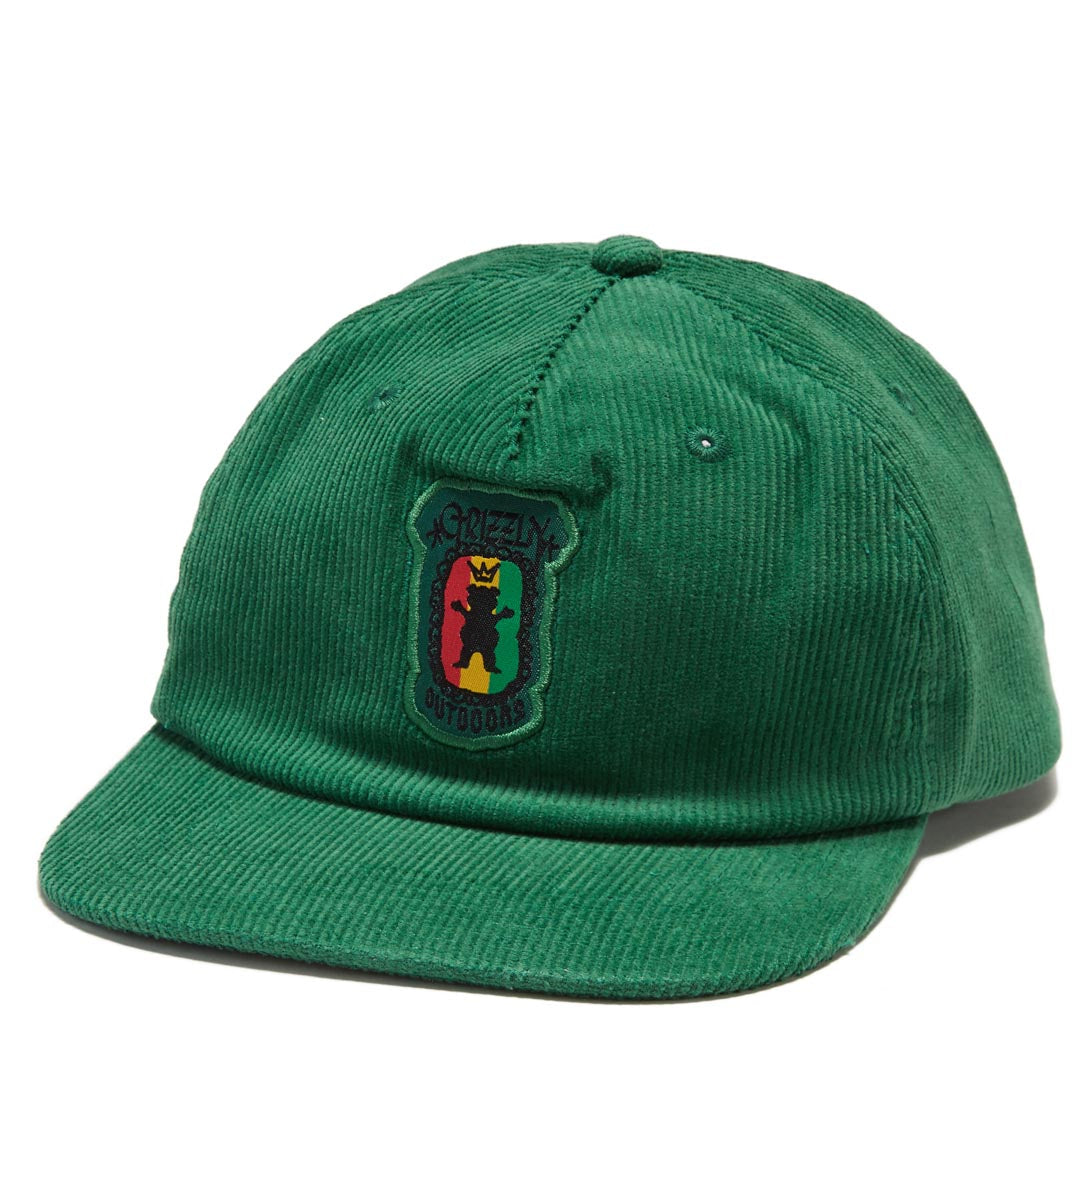 Grizzly Most High Unstructured Snapback Hat - Forest Green image 1